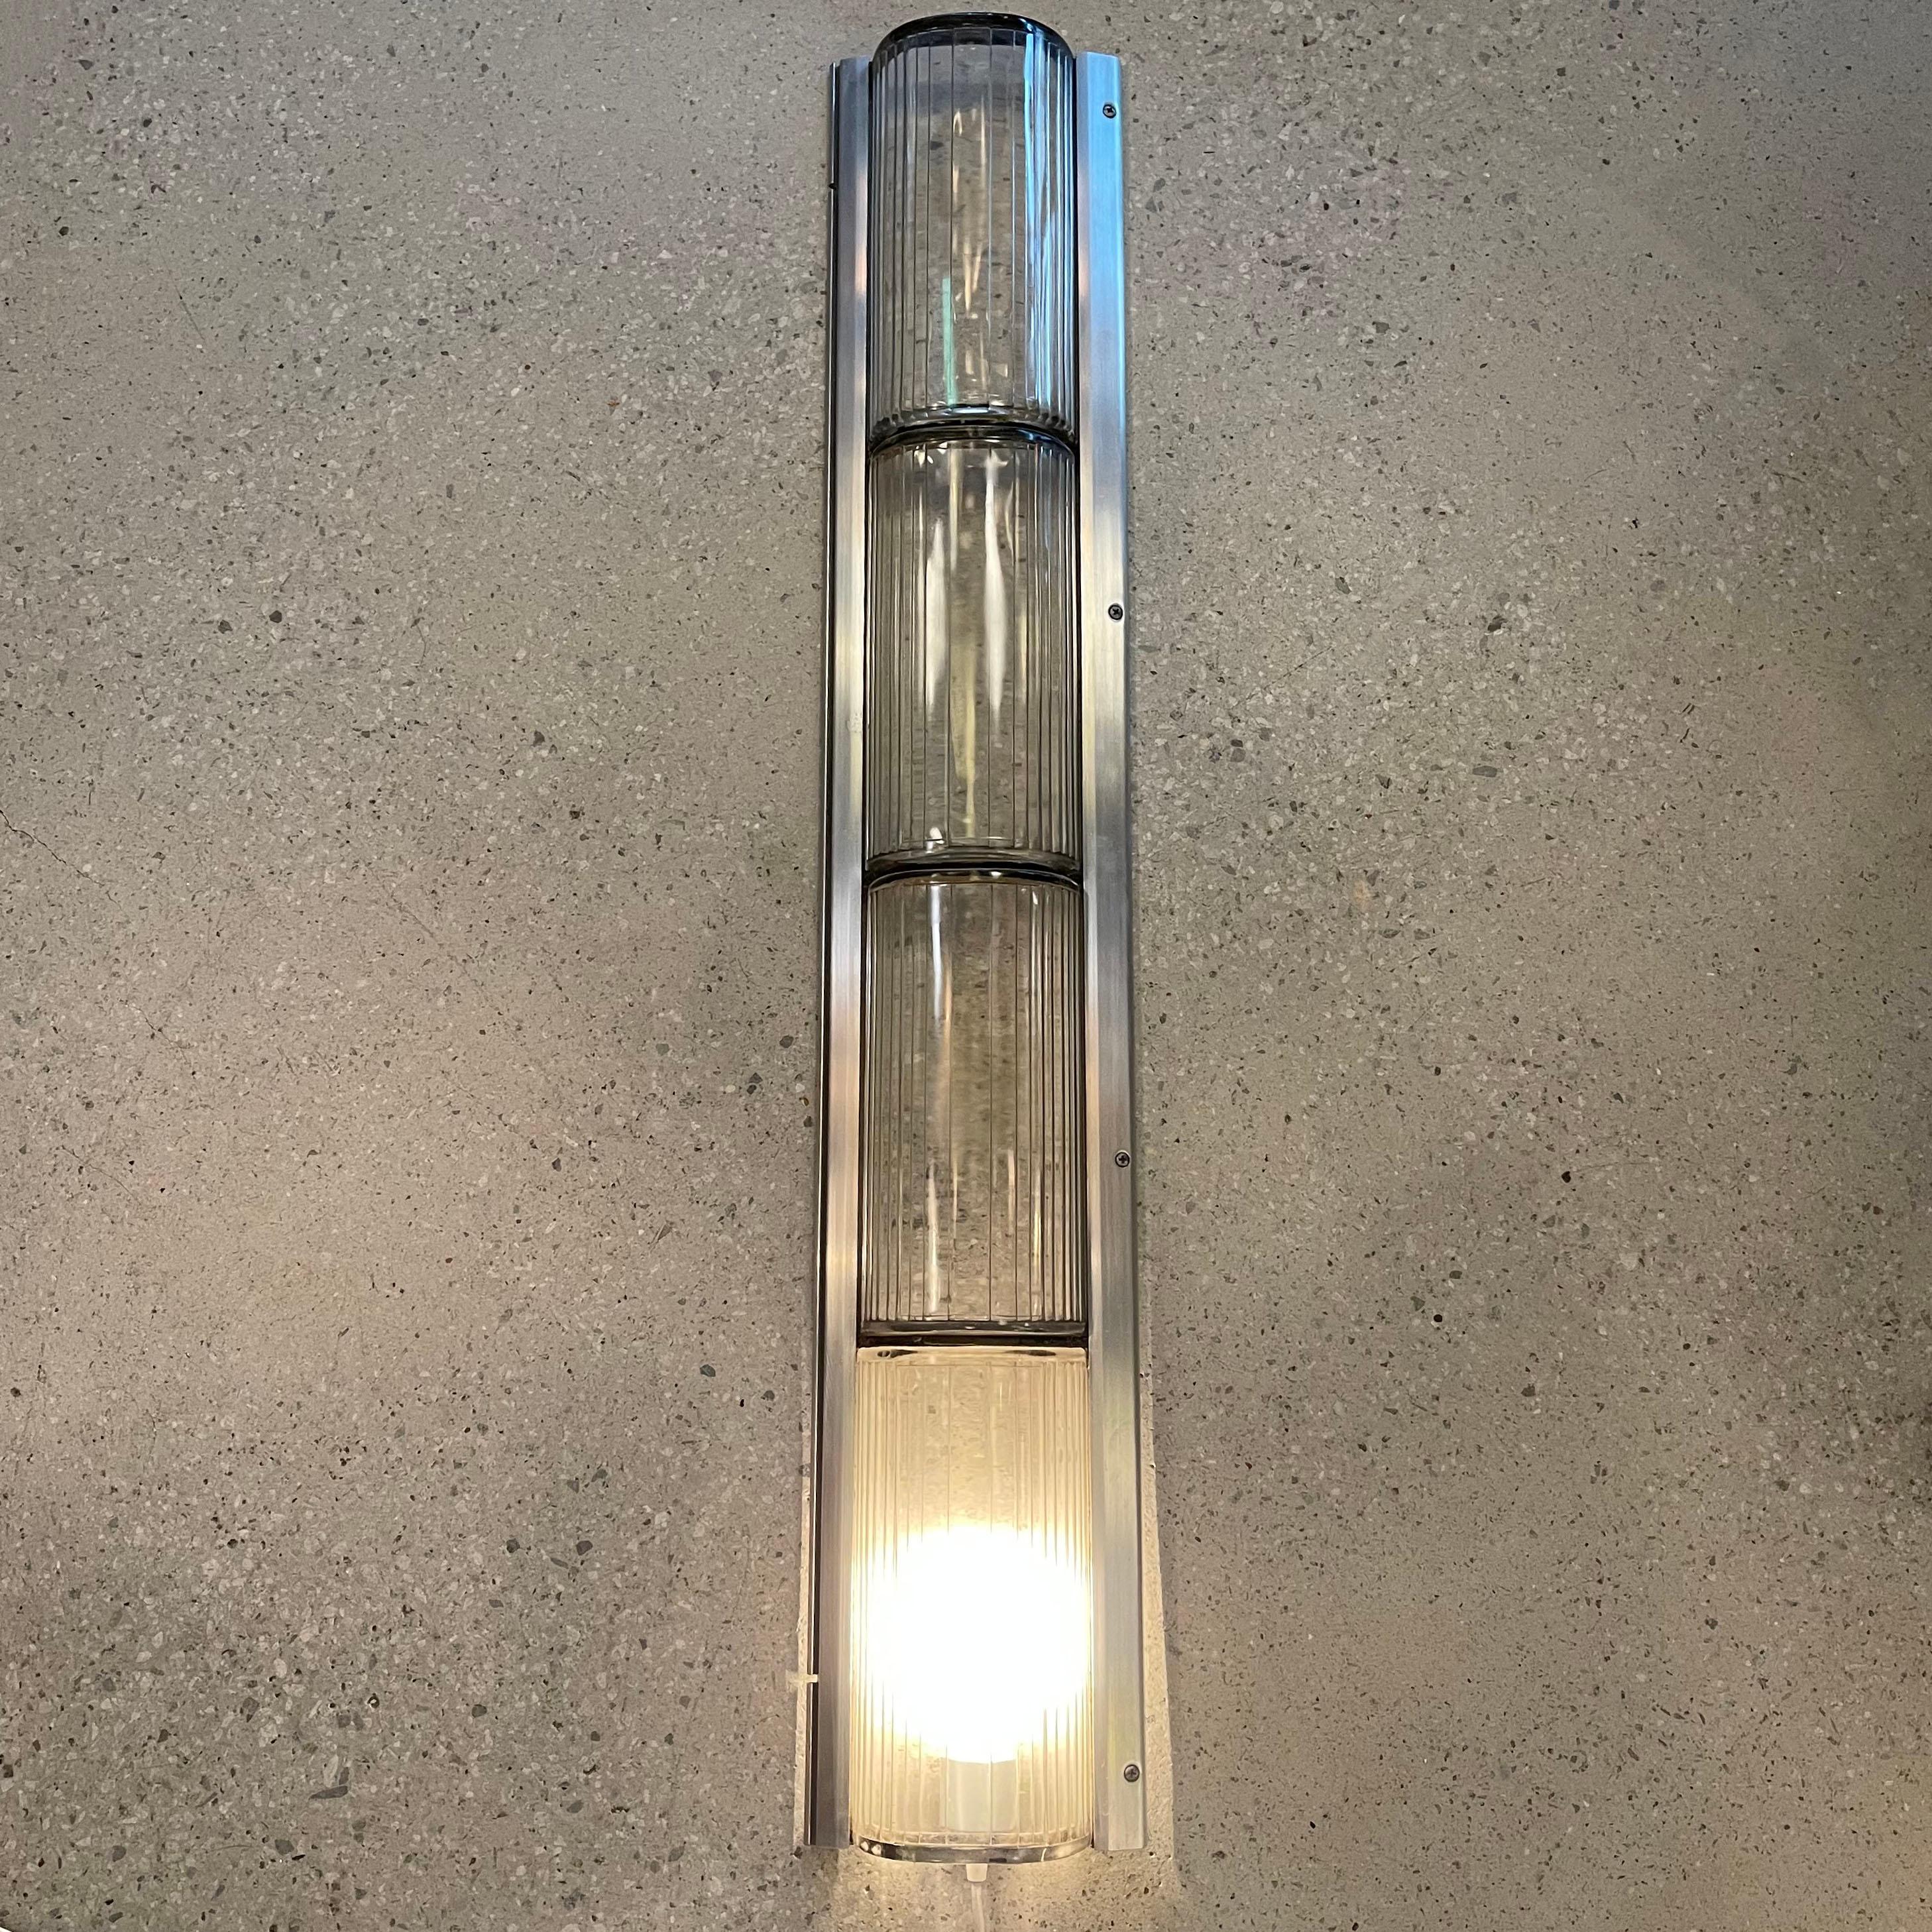 Art Deco Aluminum And Pyrex Glass Subway Light Covers In Good Condition For Sale In Brooklyn, NY